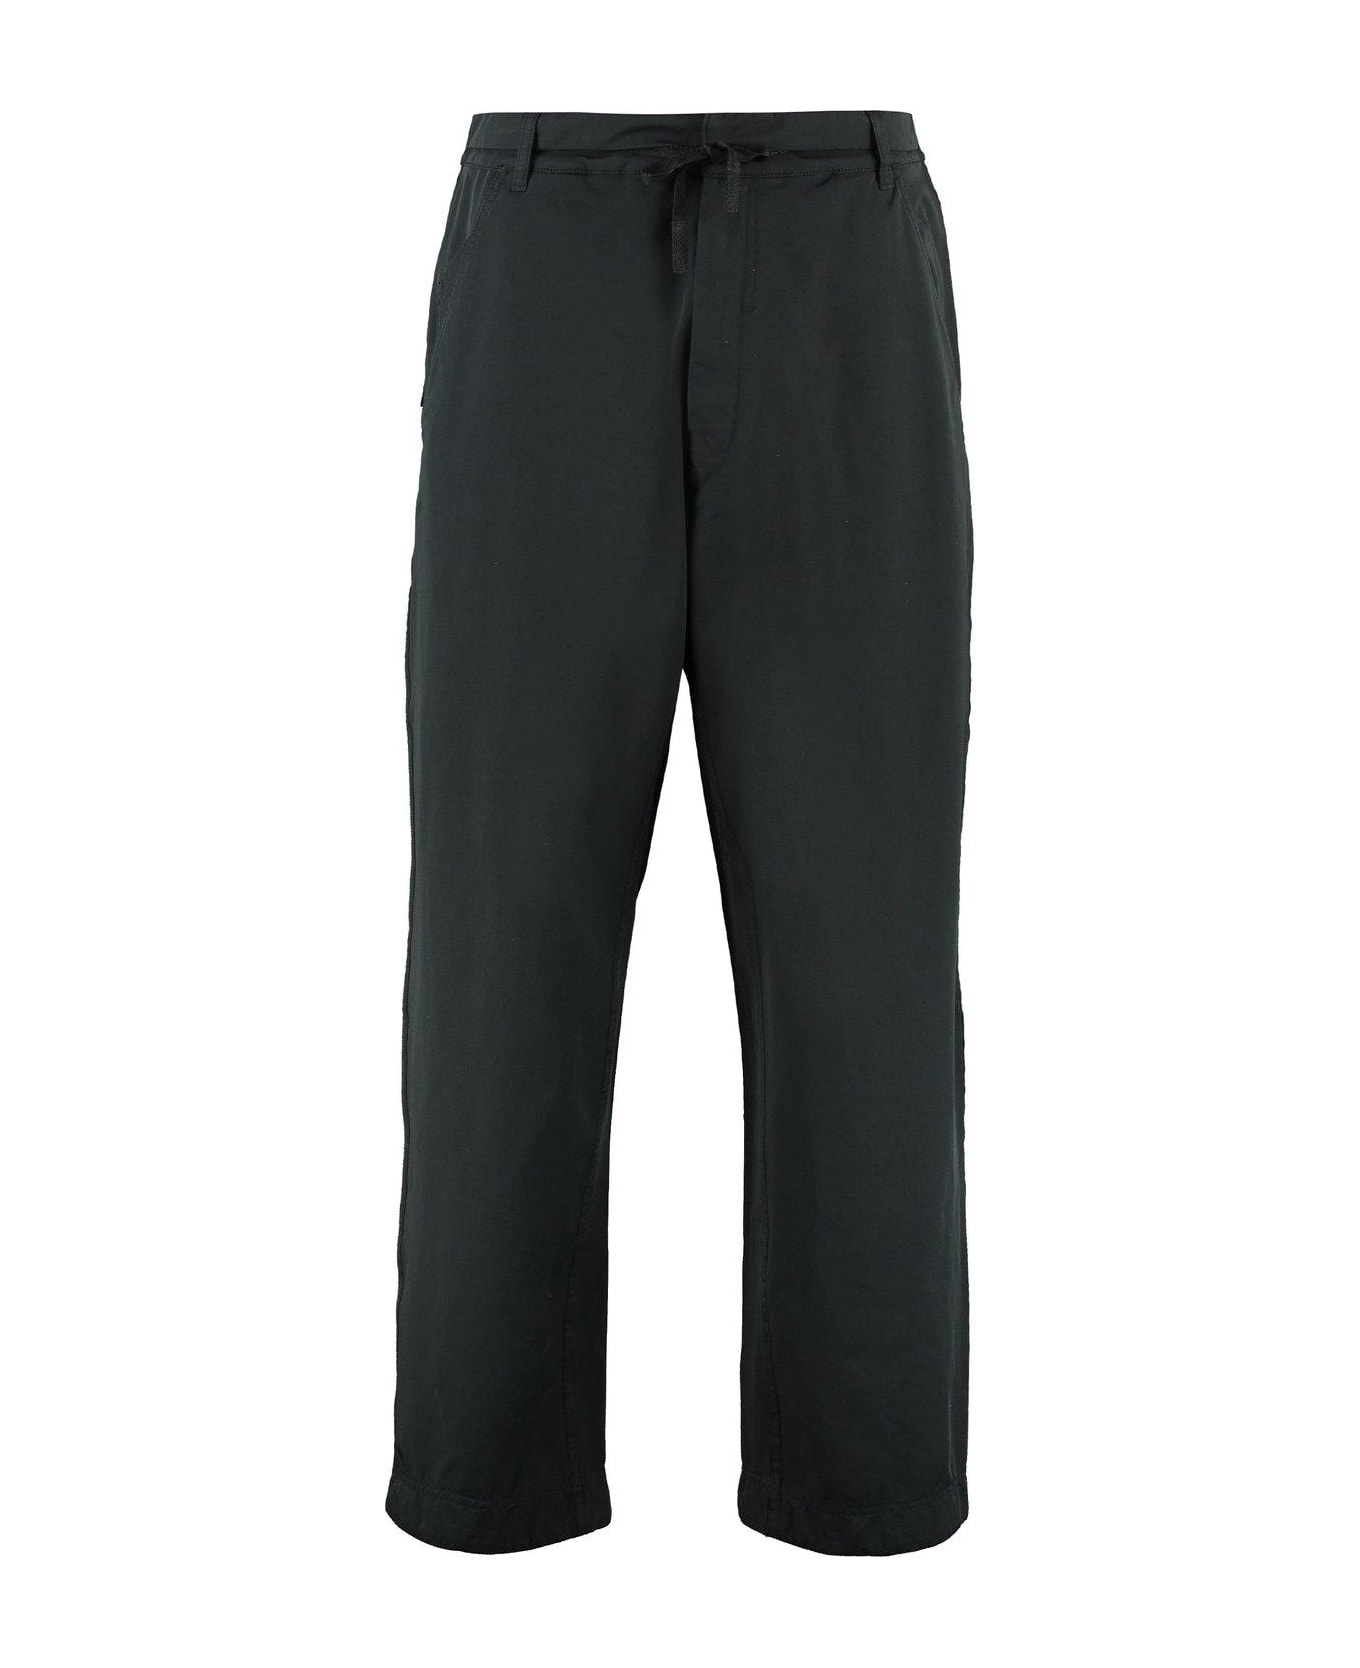 Stone Island Shadow Project Wide-leg Tailored Pants - BLACK ボトムス